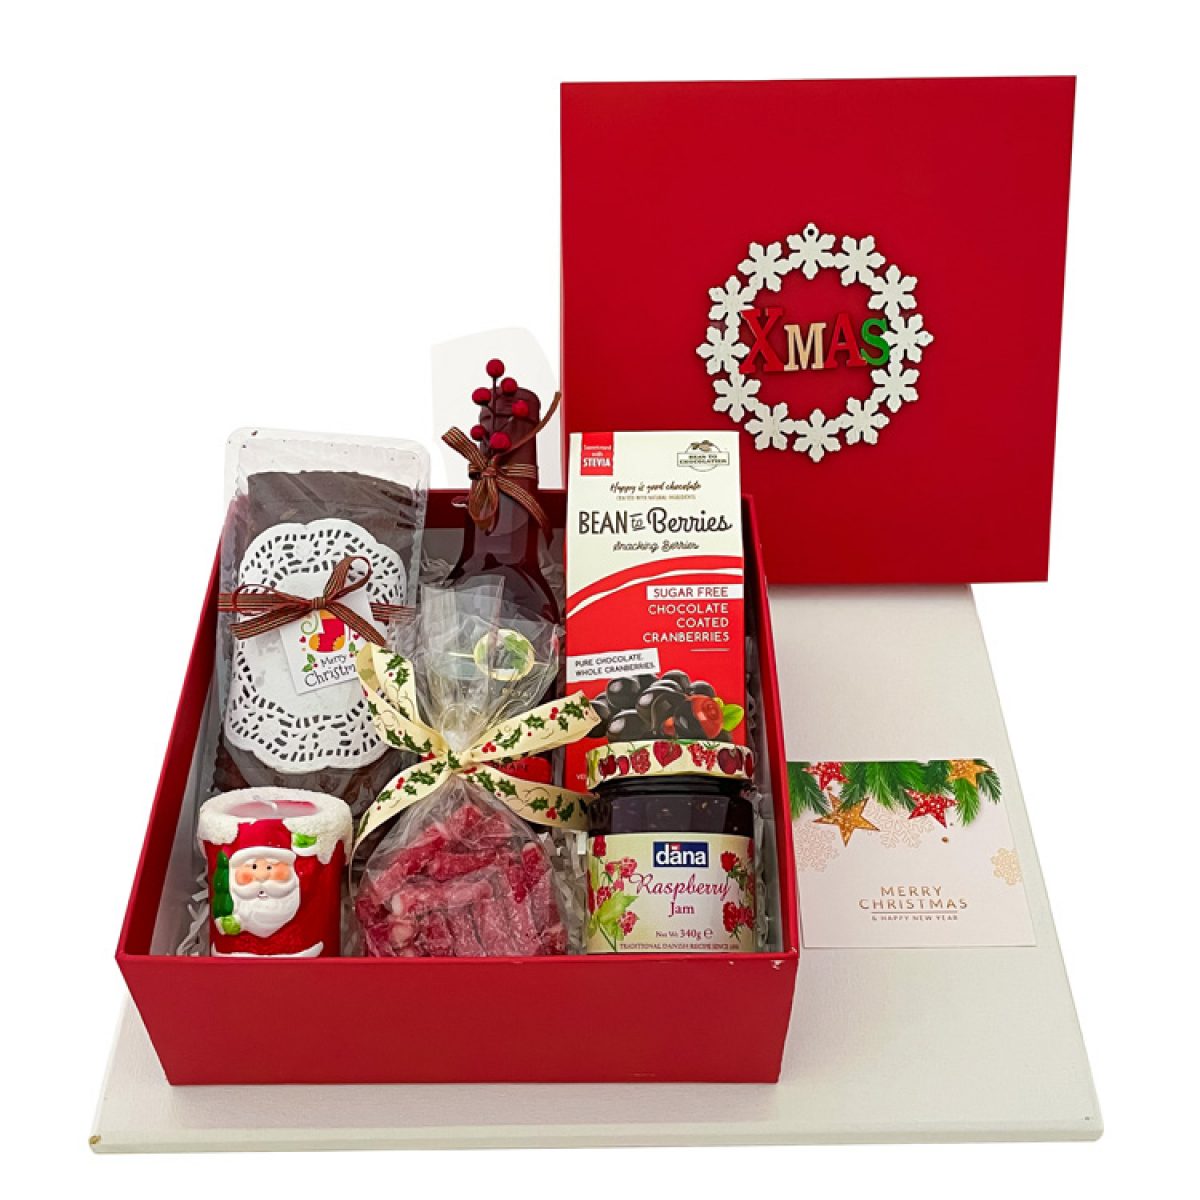 Celebrate Your Clients with New Year's Corporate Gifts